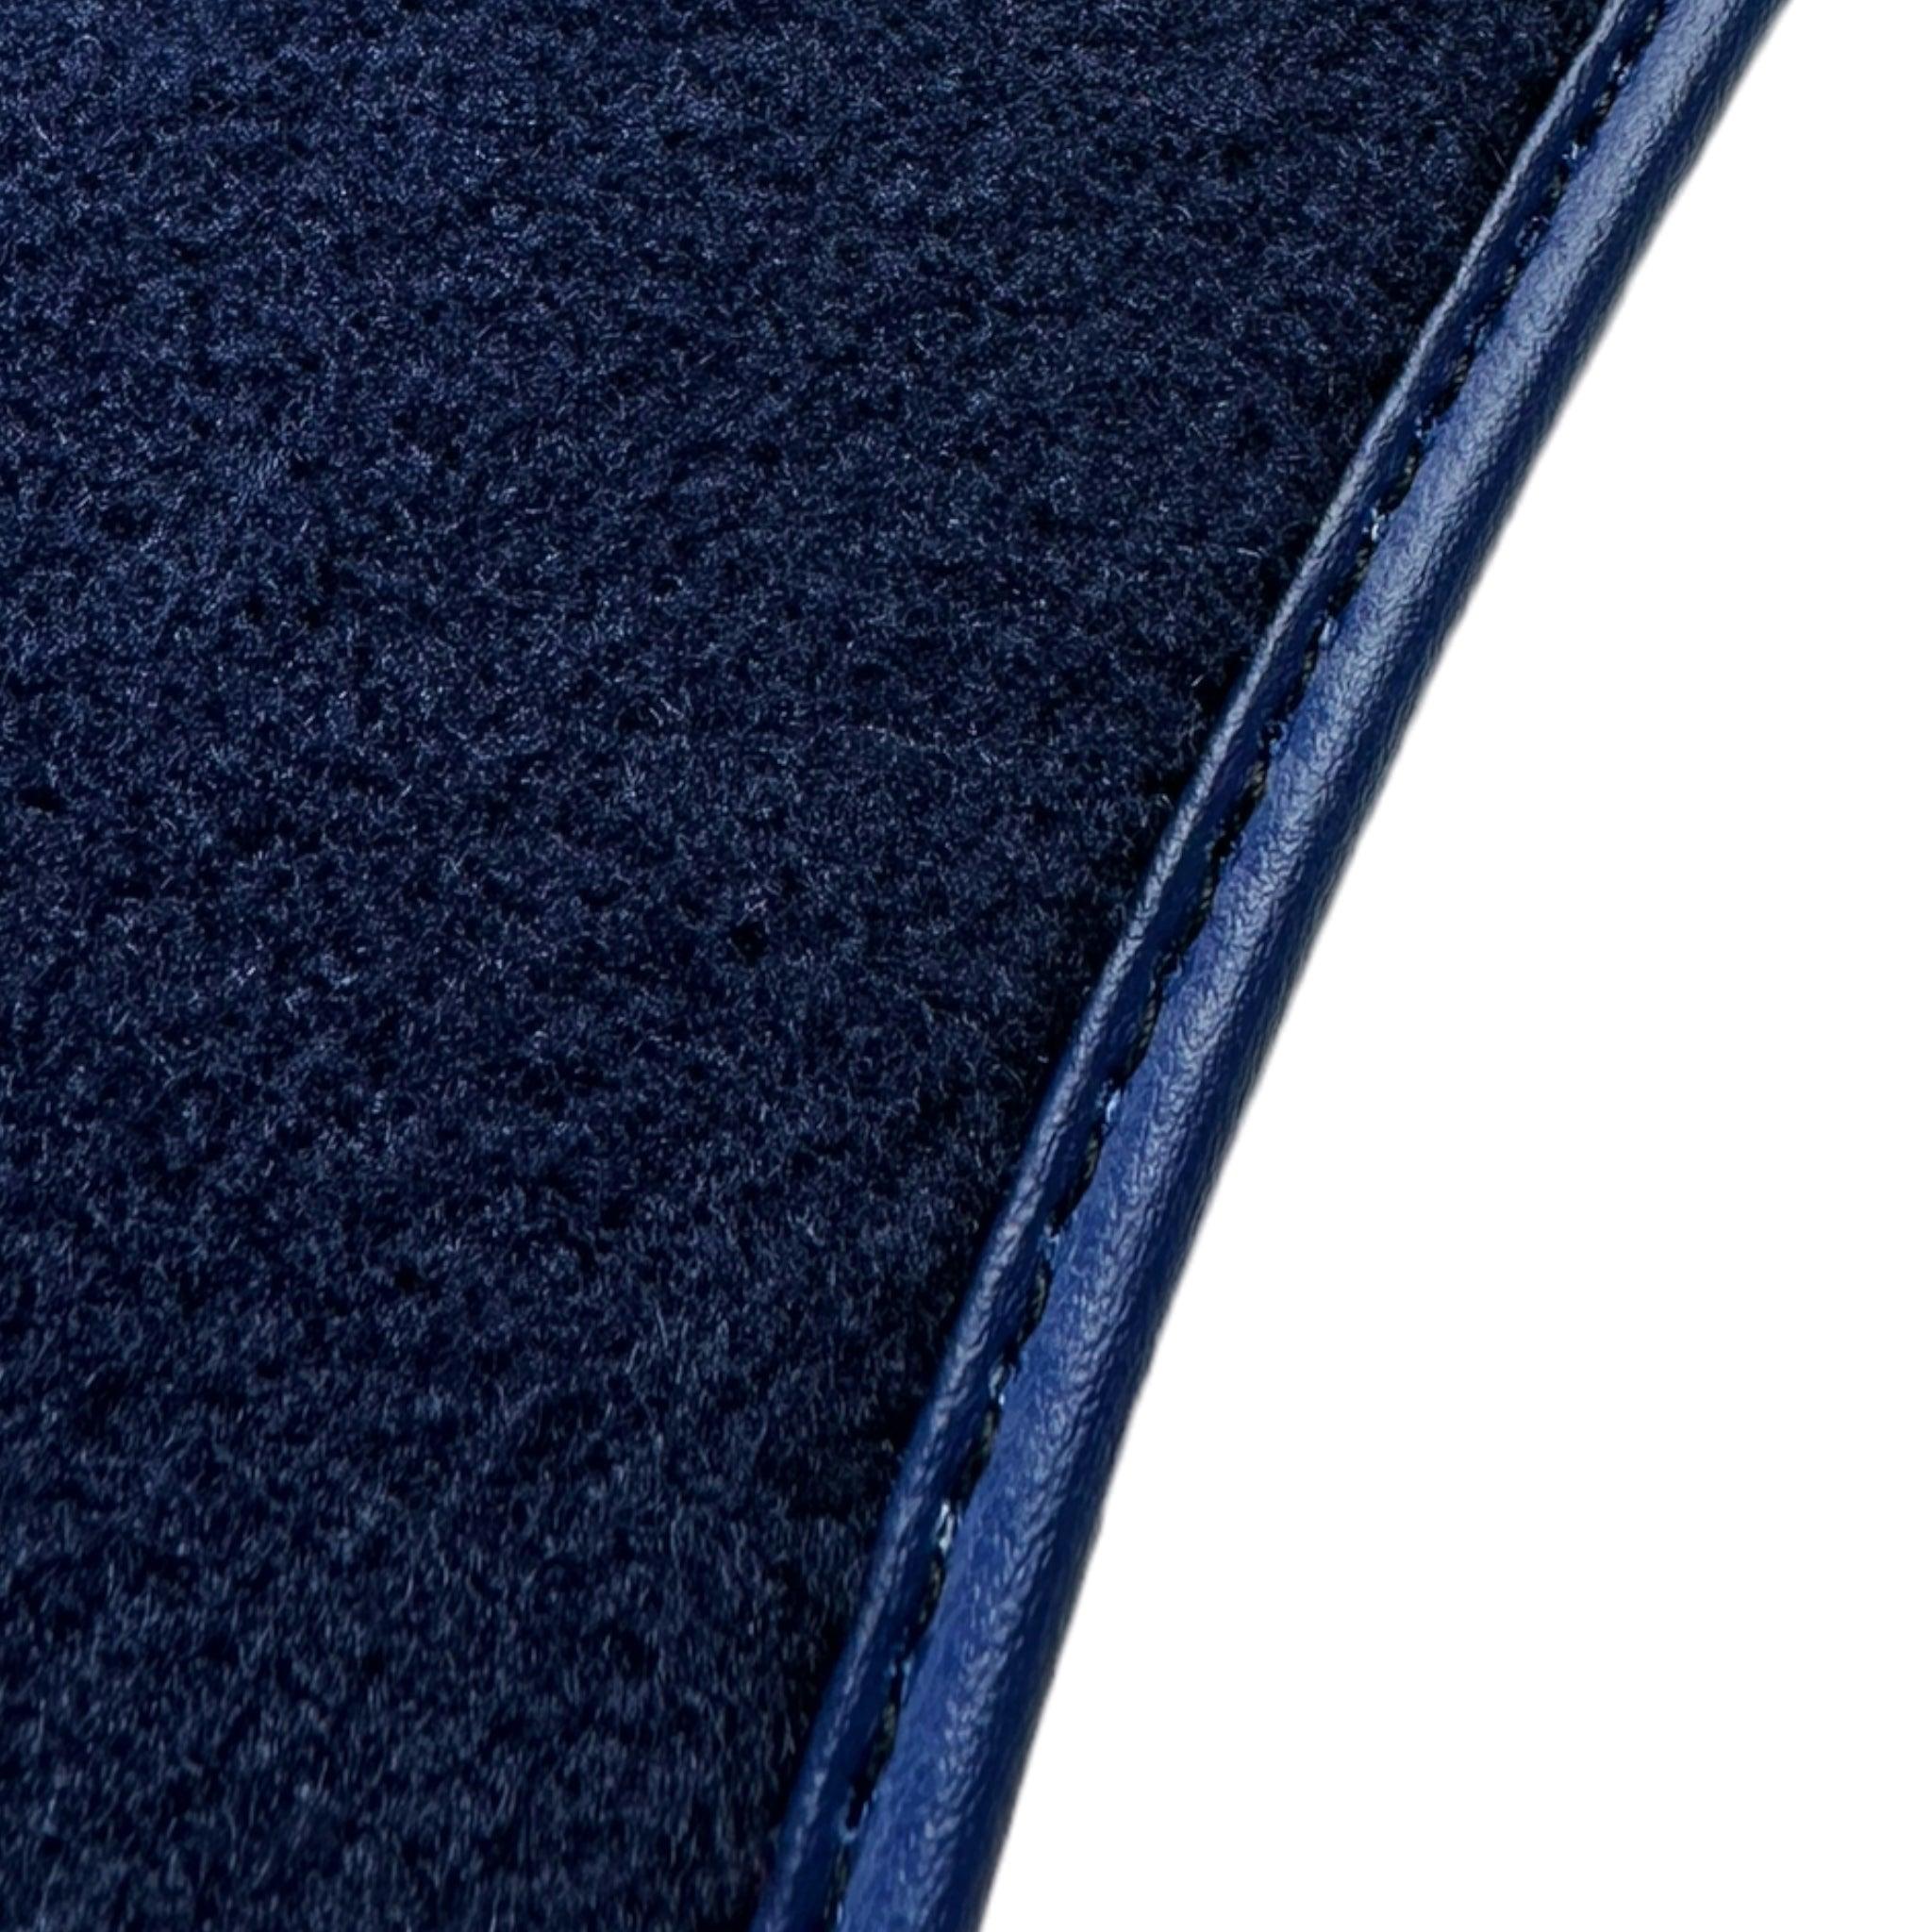 Dark Blue Floor Mats For Mercedes Benz GLC-Class C253 Coupe (2016-2019) | Limited Edition